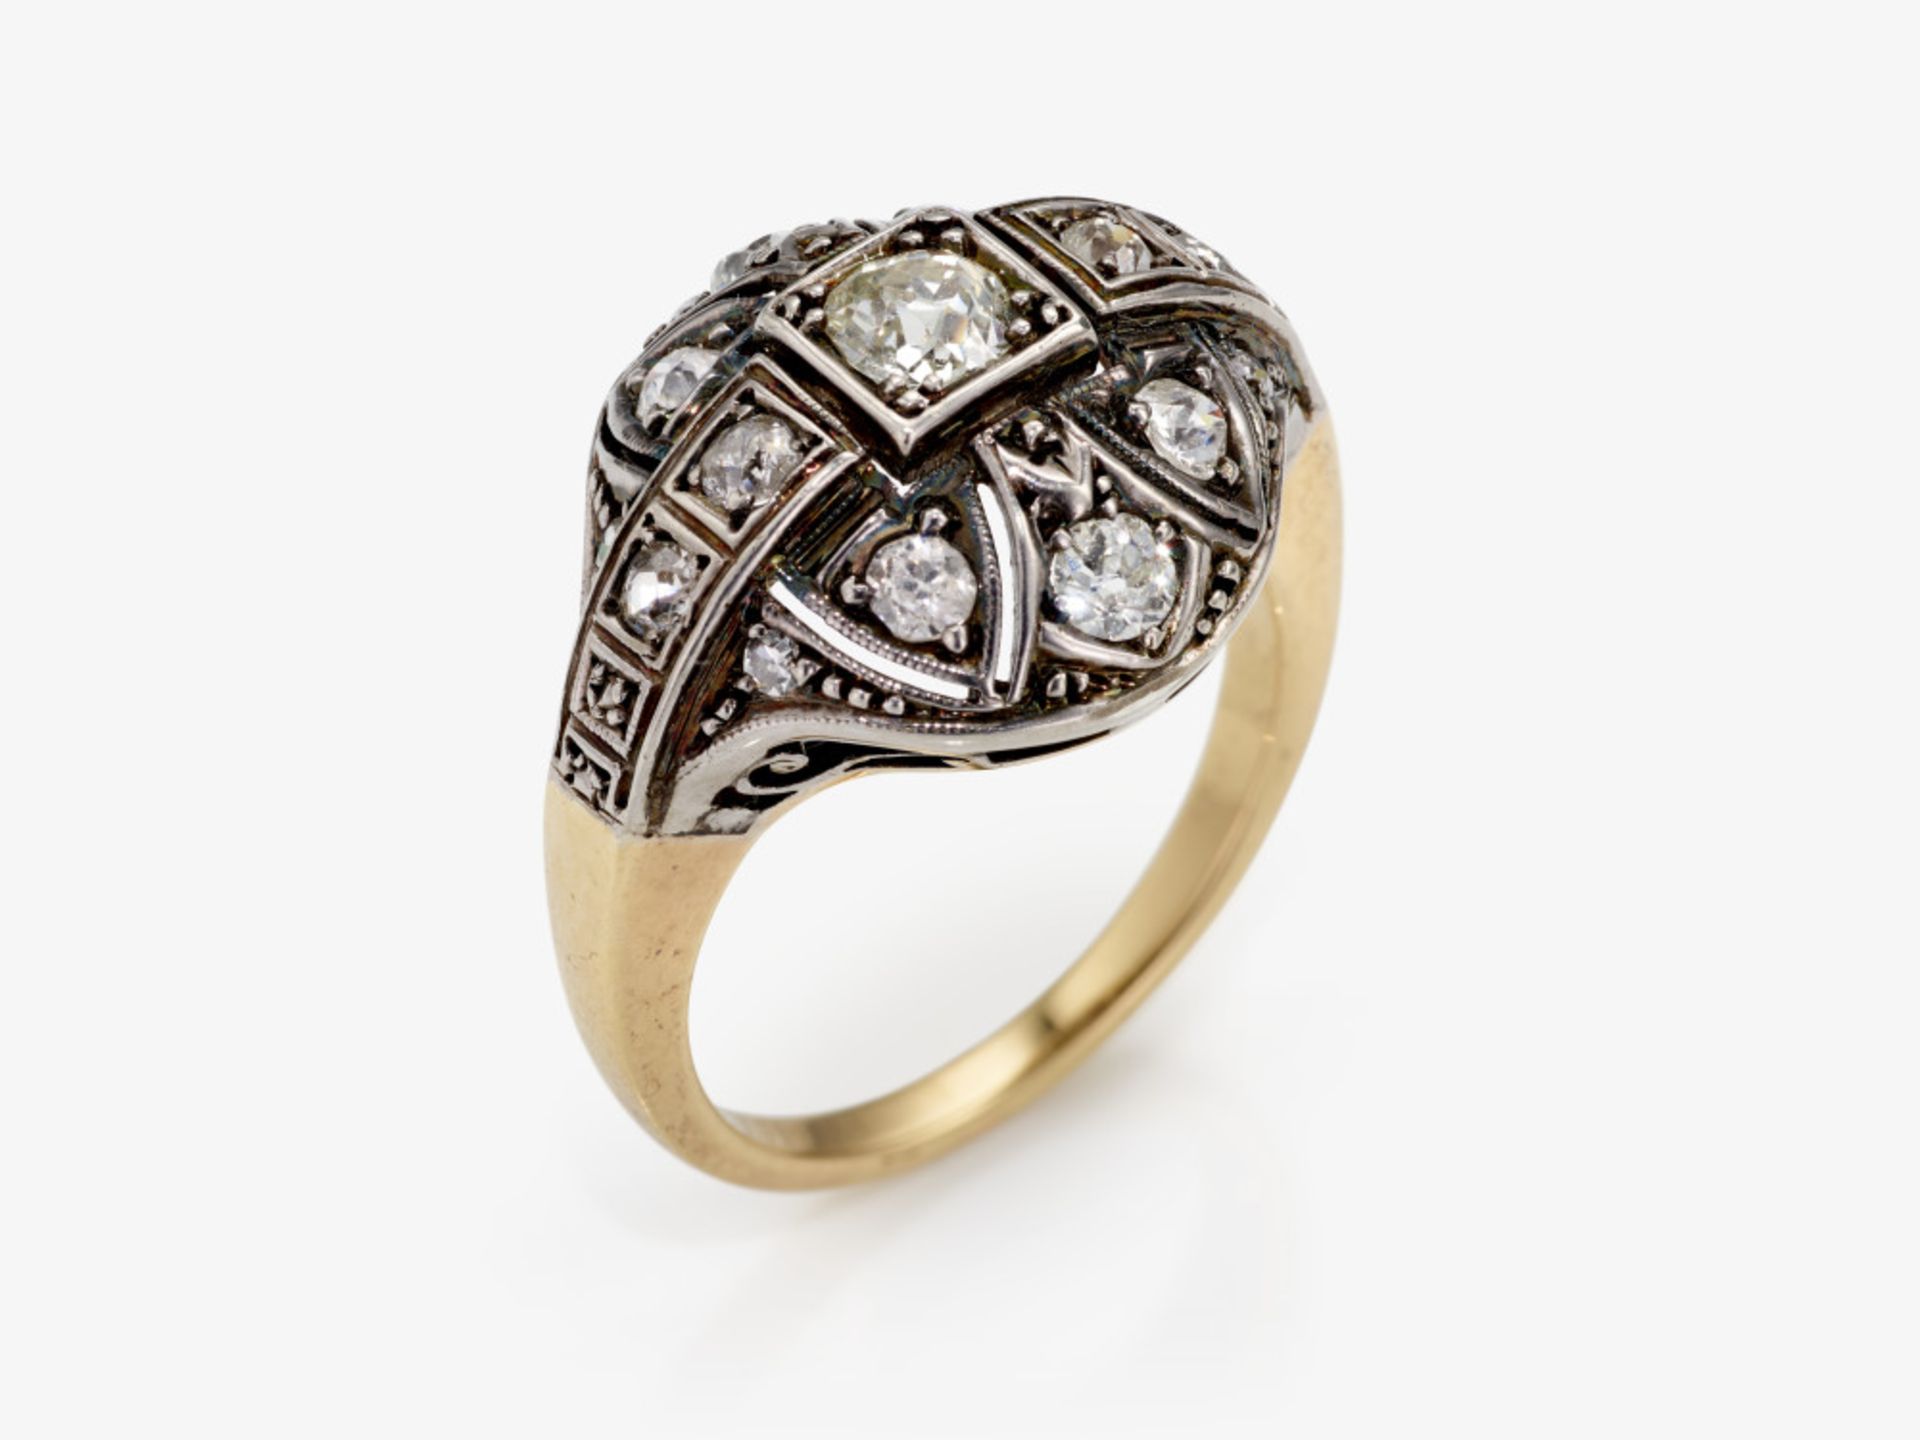 A historicising ring decorated with old-cut diamonds